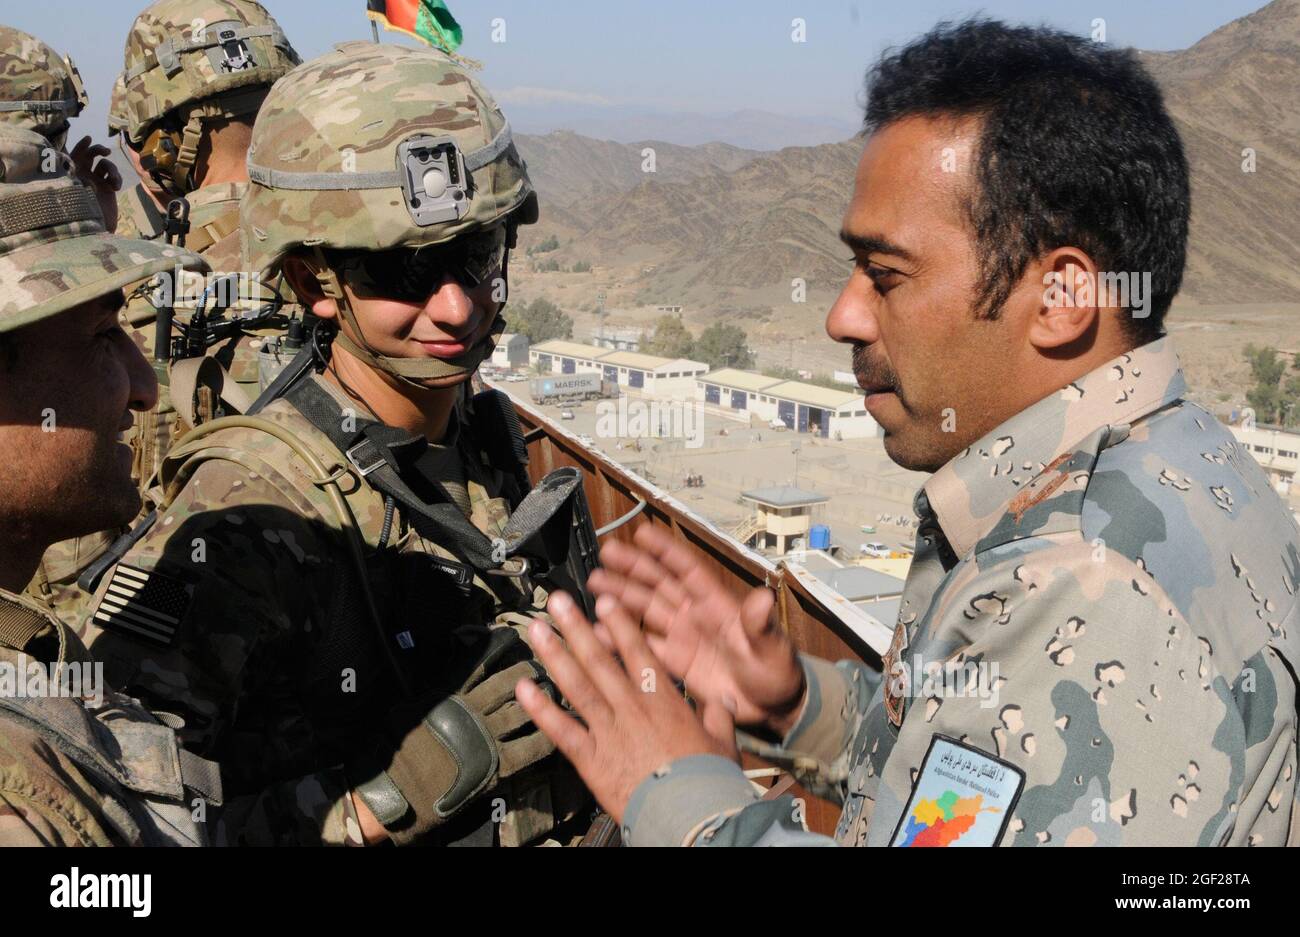 U.S. Army 2nd Lt. Michael Sardinas, platoon leader (center), Company C, 2nd Battalion, 30th Infantry Regiment, 4th Brigade Combat Team, 10th Mountain Division, from Tampa, Fla., discusses operations with an Afghan Border Police officer, Nov. 19, 2013, while standing on a vantage point above the Afghanistan/Pakistan border at Torkham. Sardinas and others visited the border to get better situational awareness of the techniques and procedures the ABP use to help secure this critical supply route for NATO forces and the people of Afghanistan. (U.S. Army Photo by Sgt. Eric Provost, Task Force Patri Stock Photo